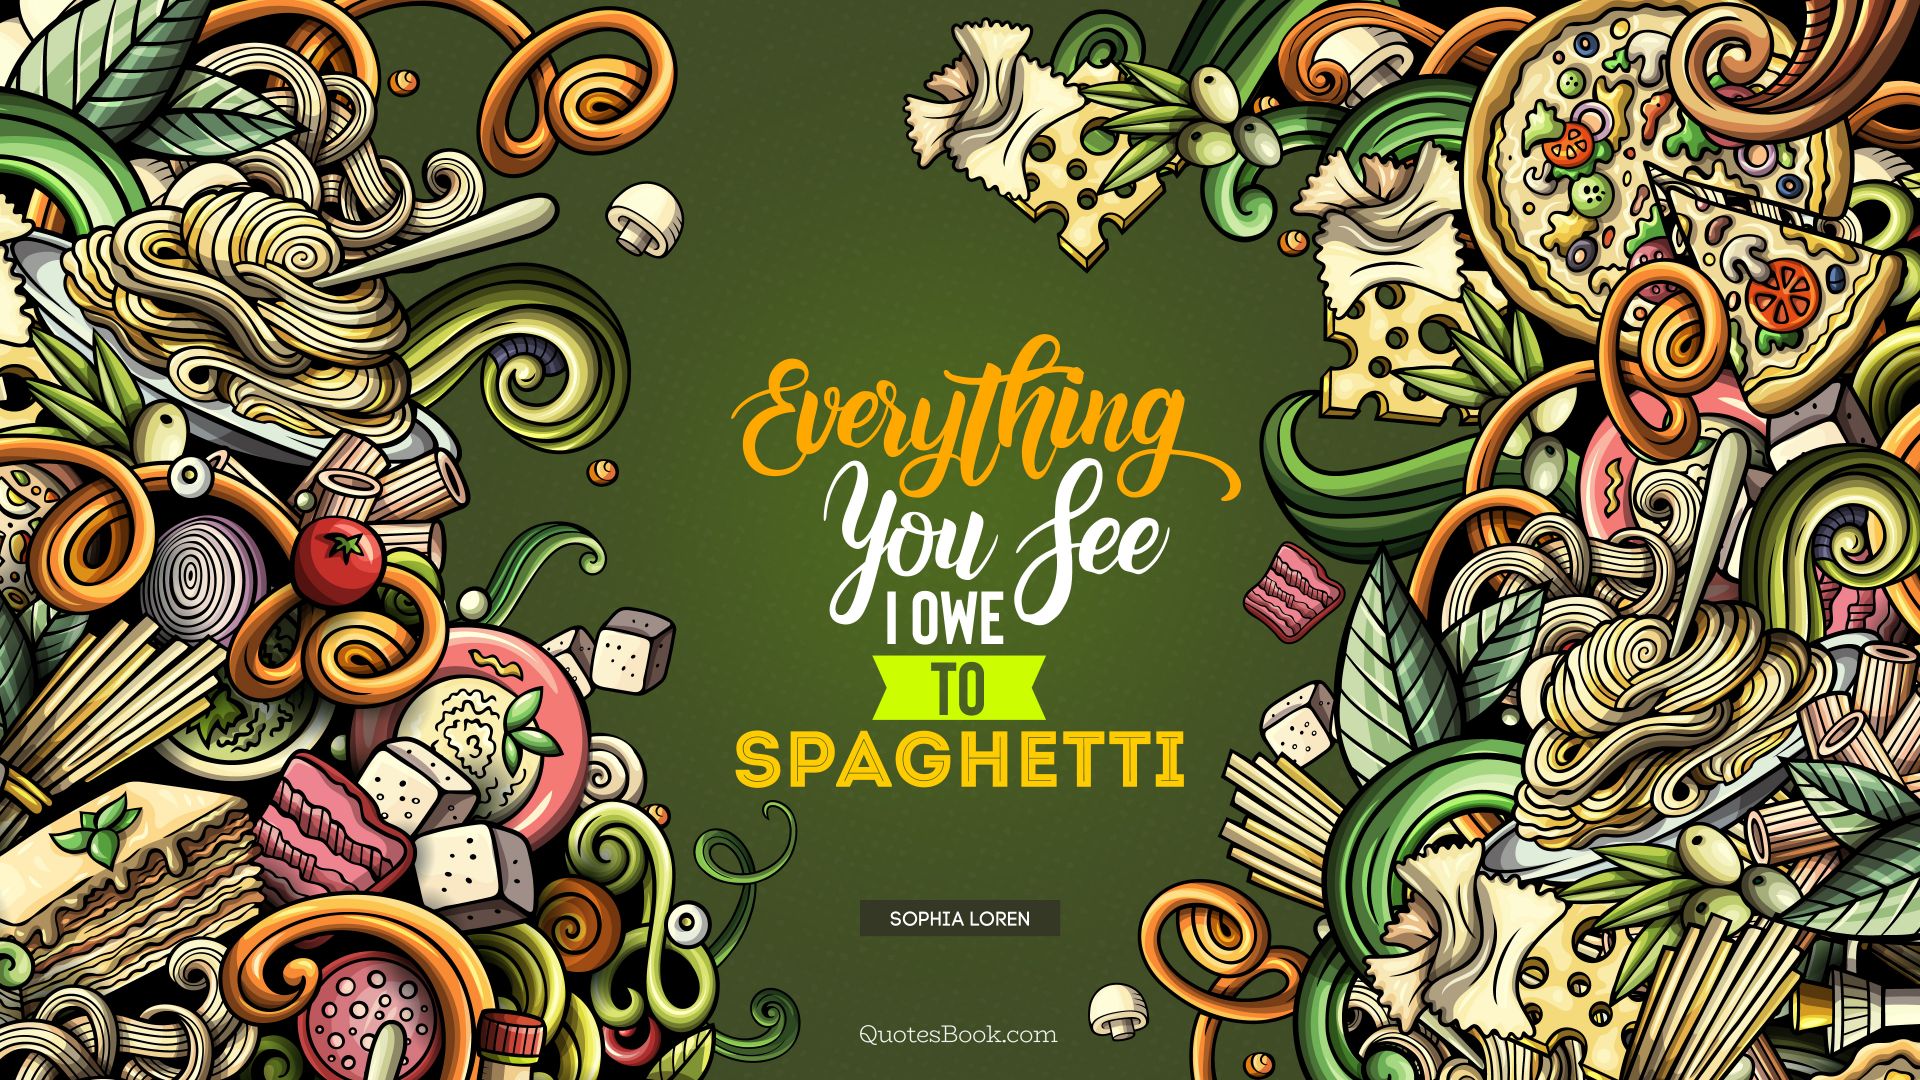 Everything you see I owe to spaghetti. - Quote by Sophia Loren